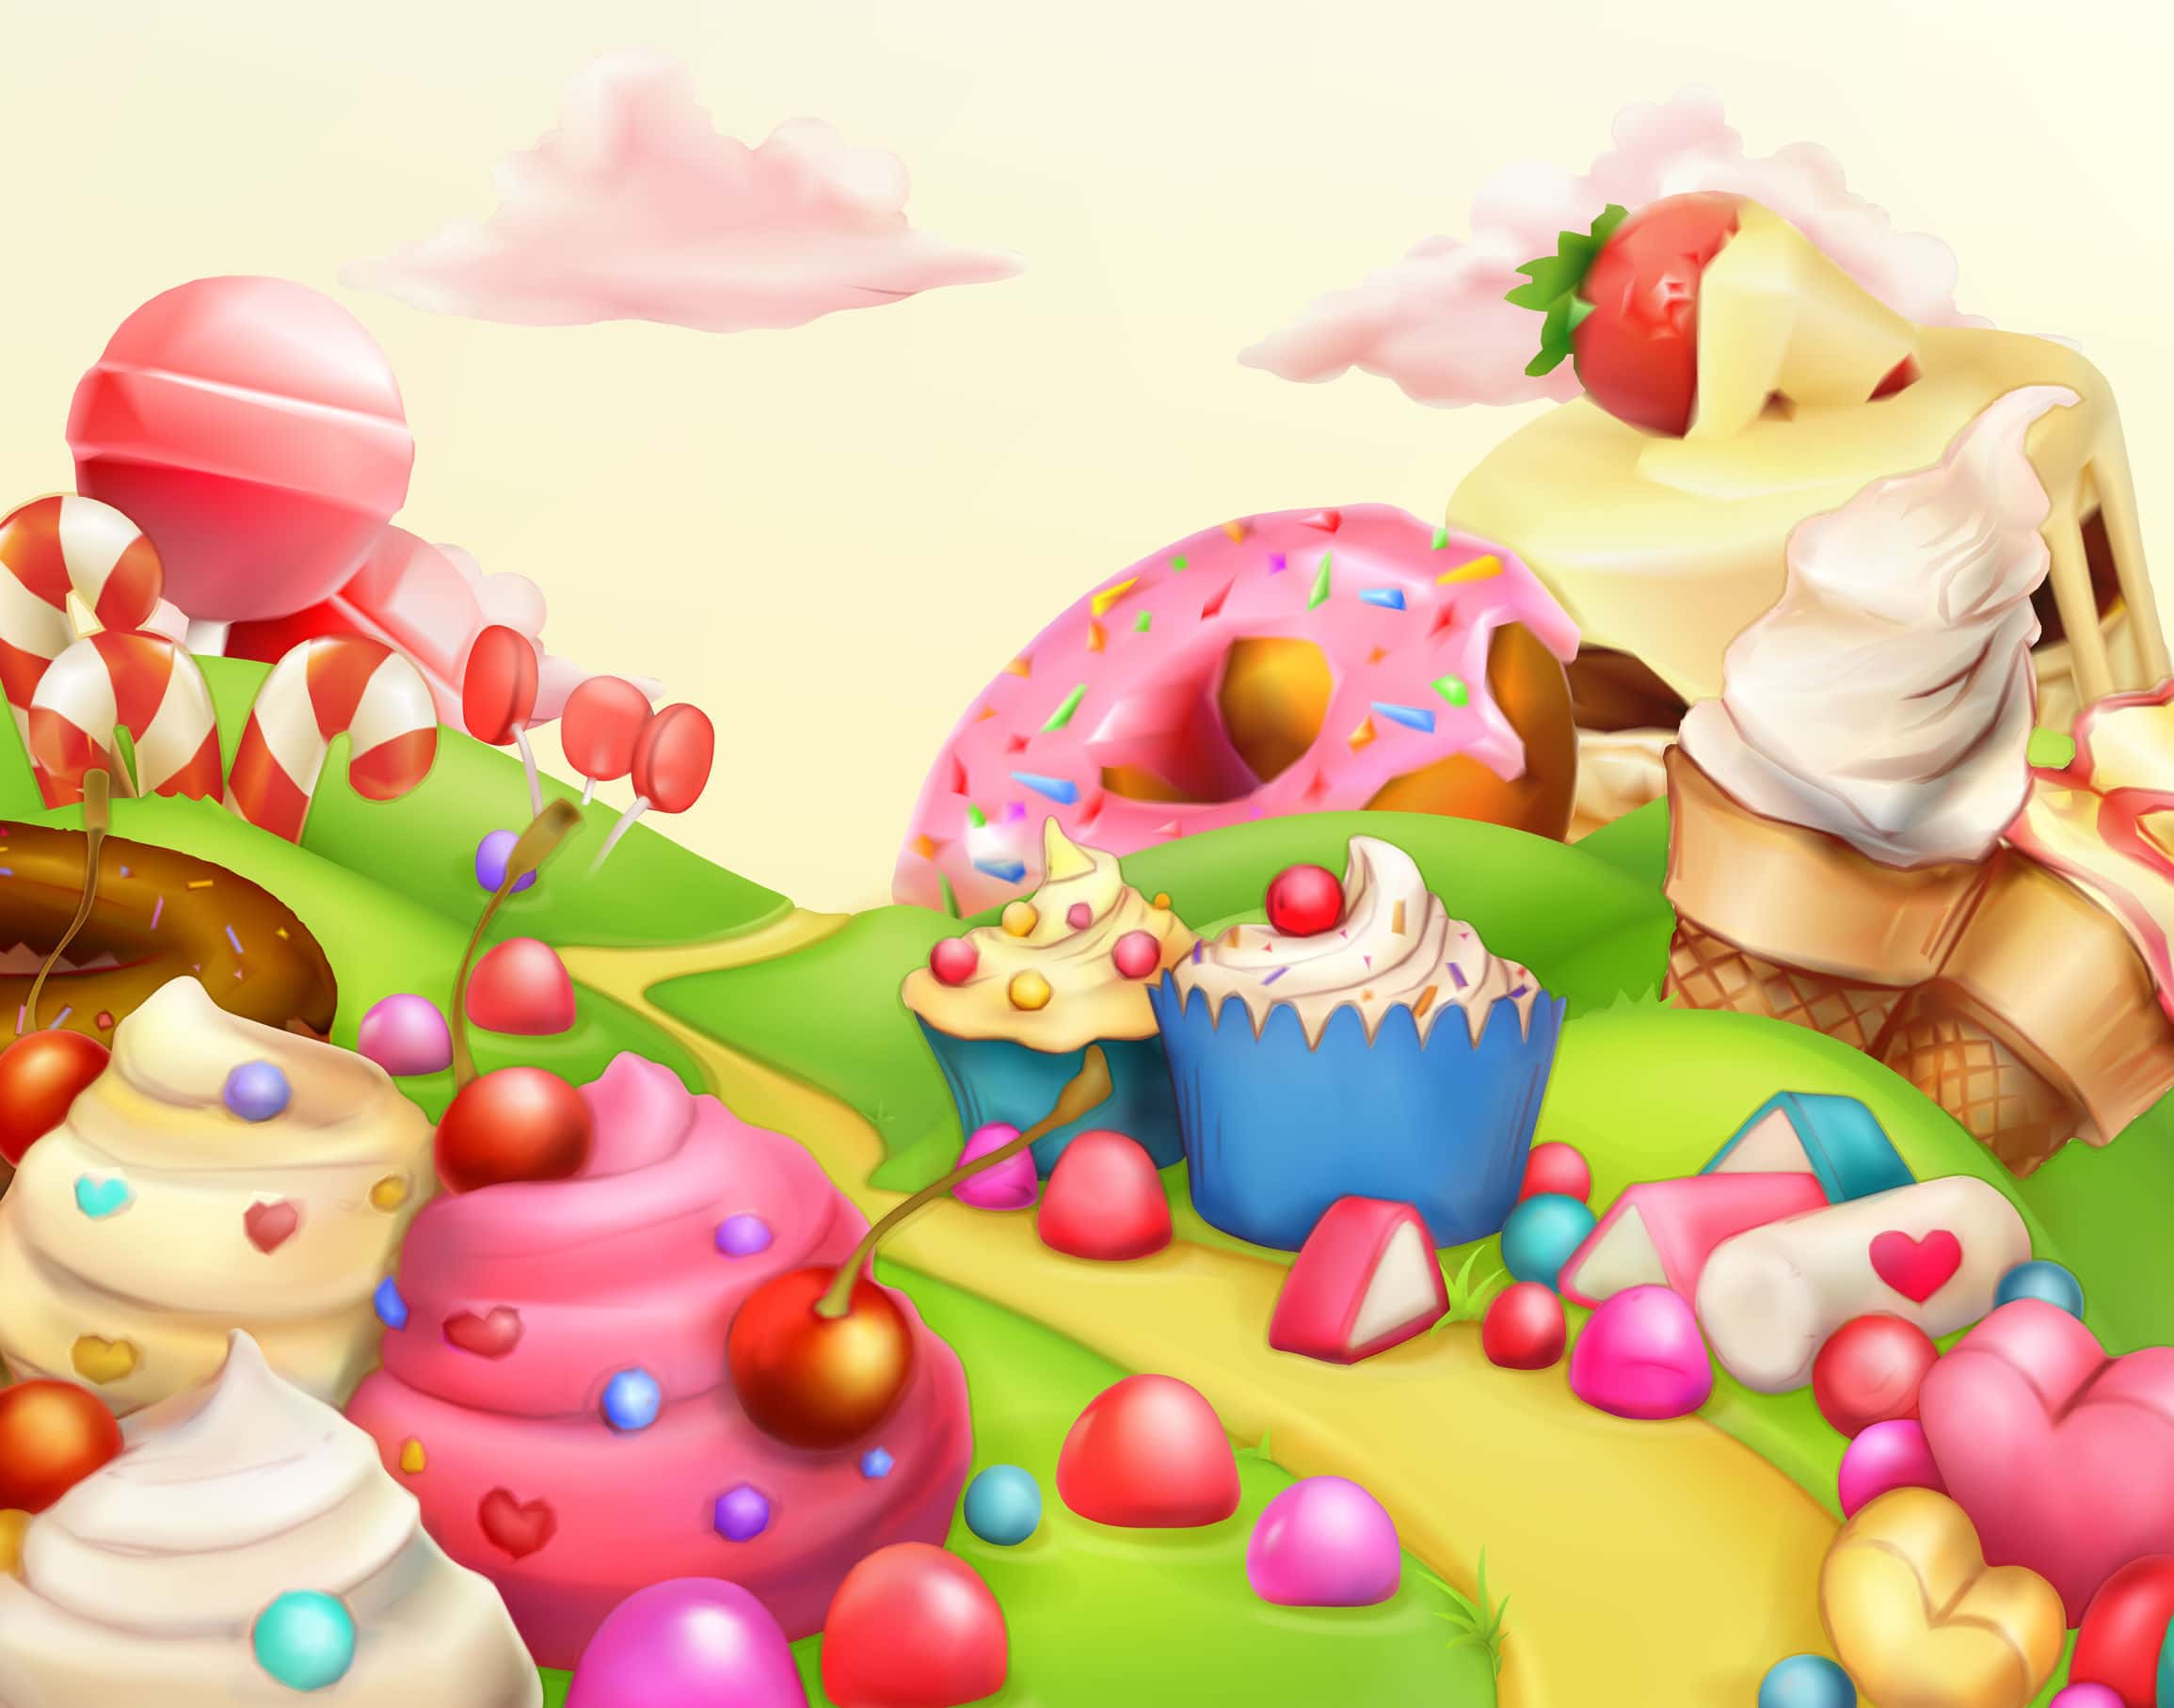 Download Cutting Down On Added Sugars: A Walk Into Candy Land ...